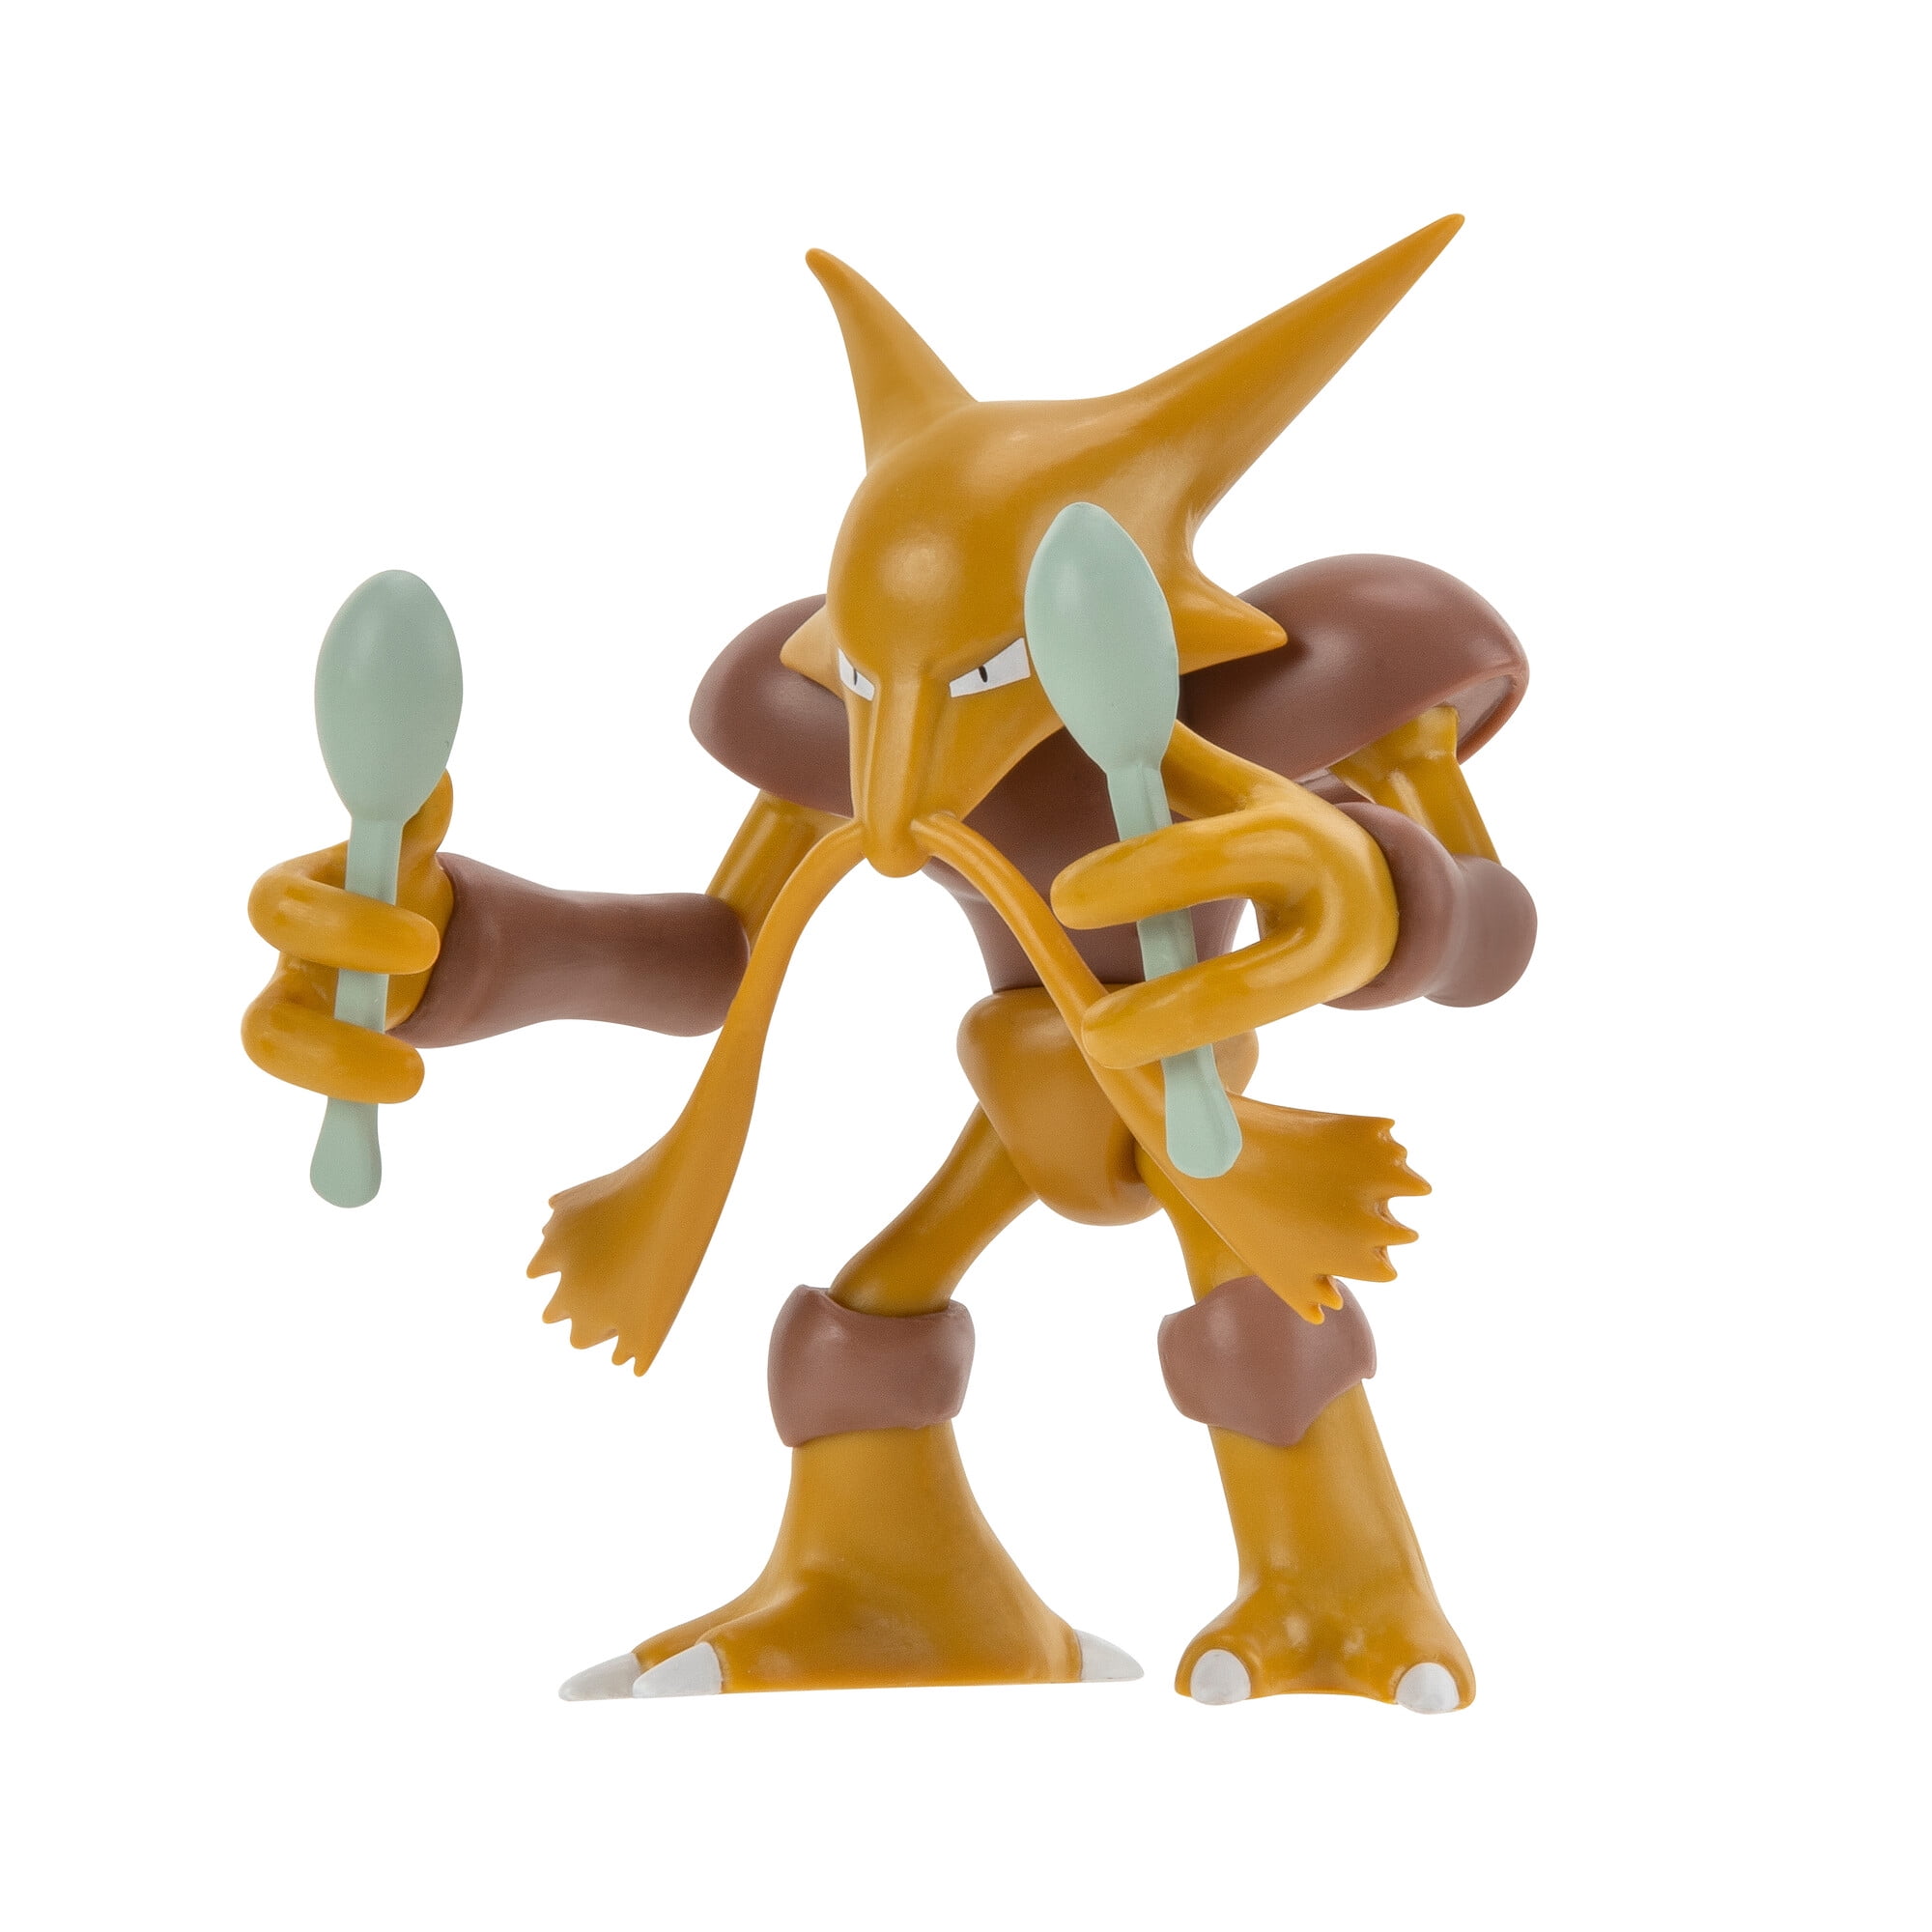 Alakazam Toys - All You Need to Know BEFORE You Go (with Photos)